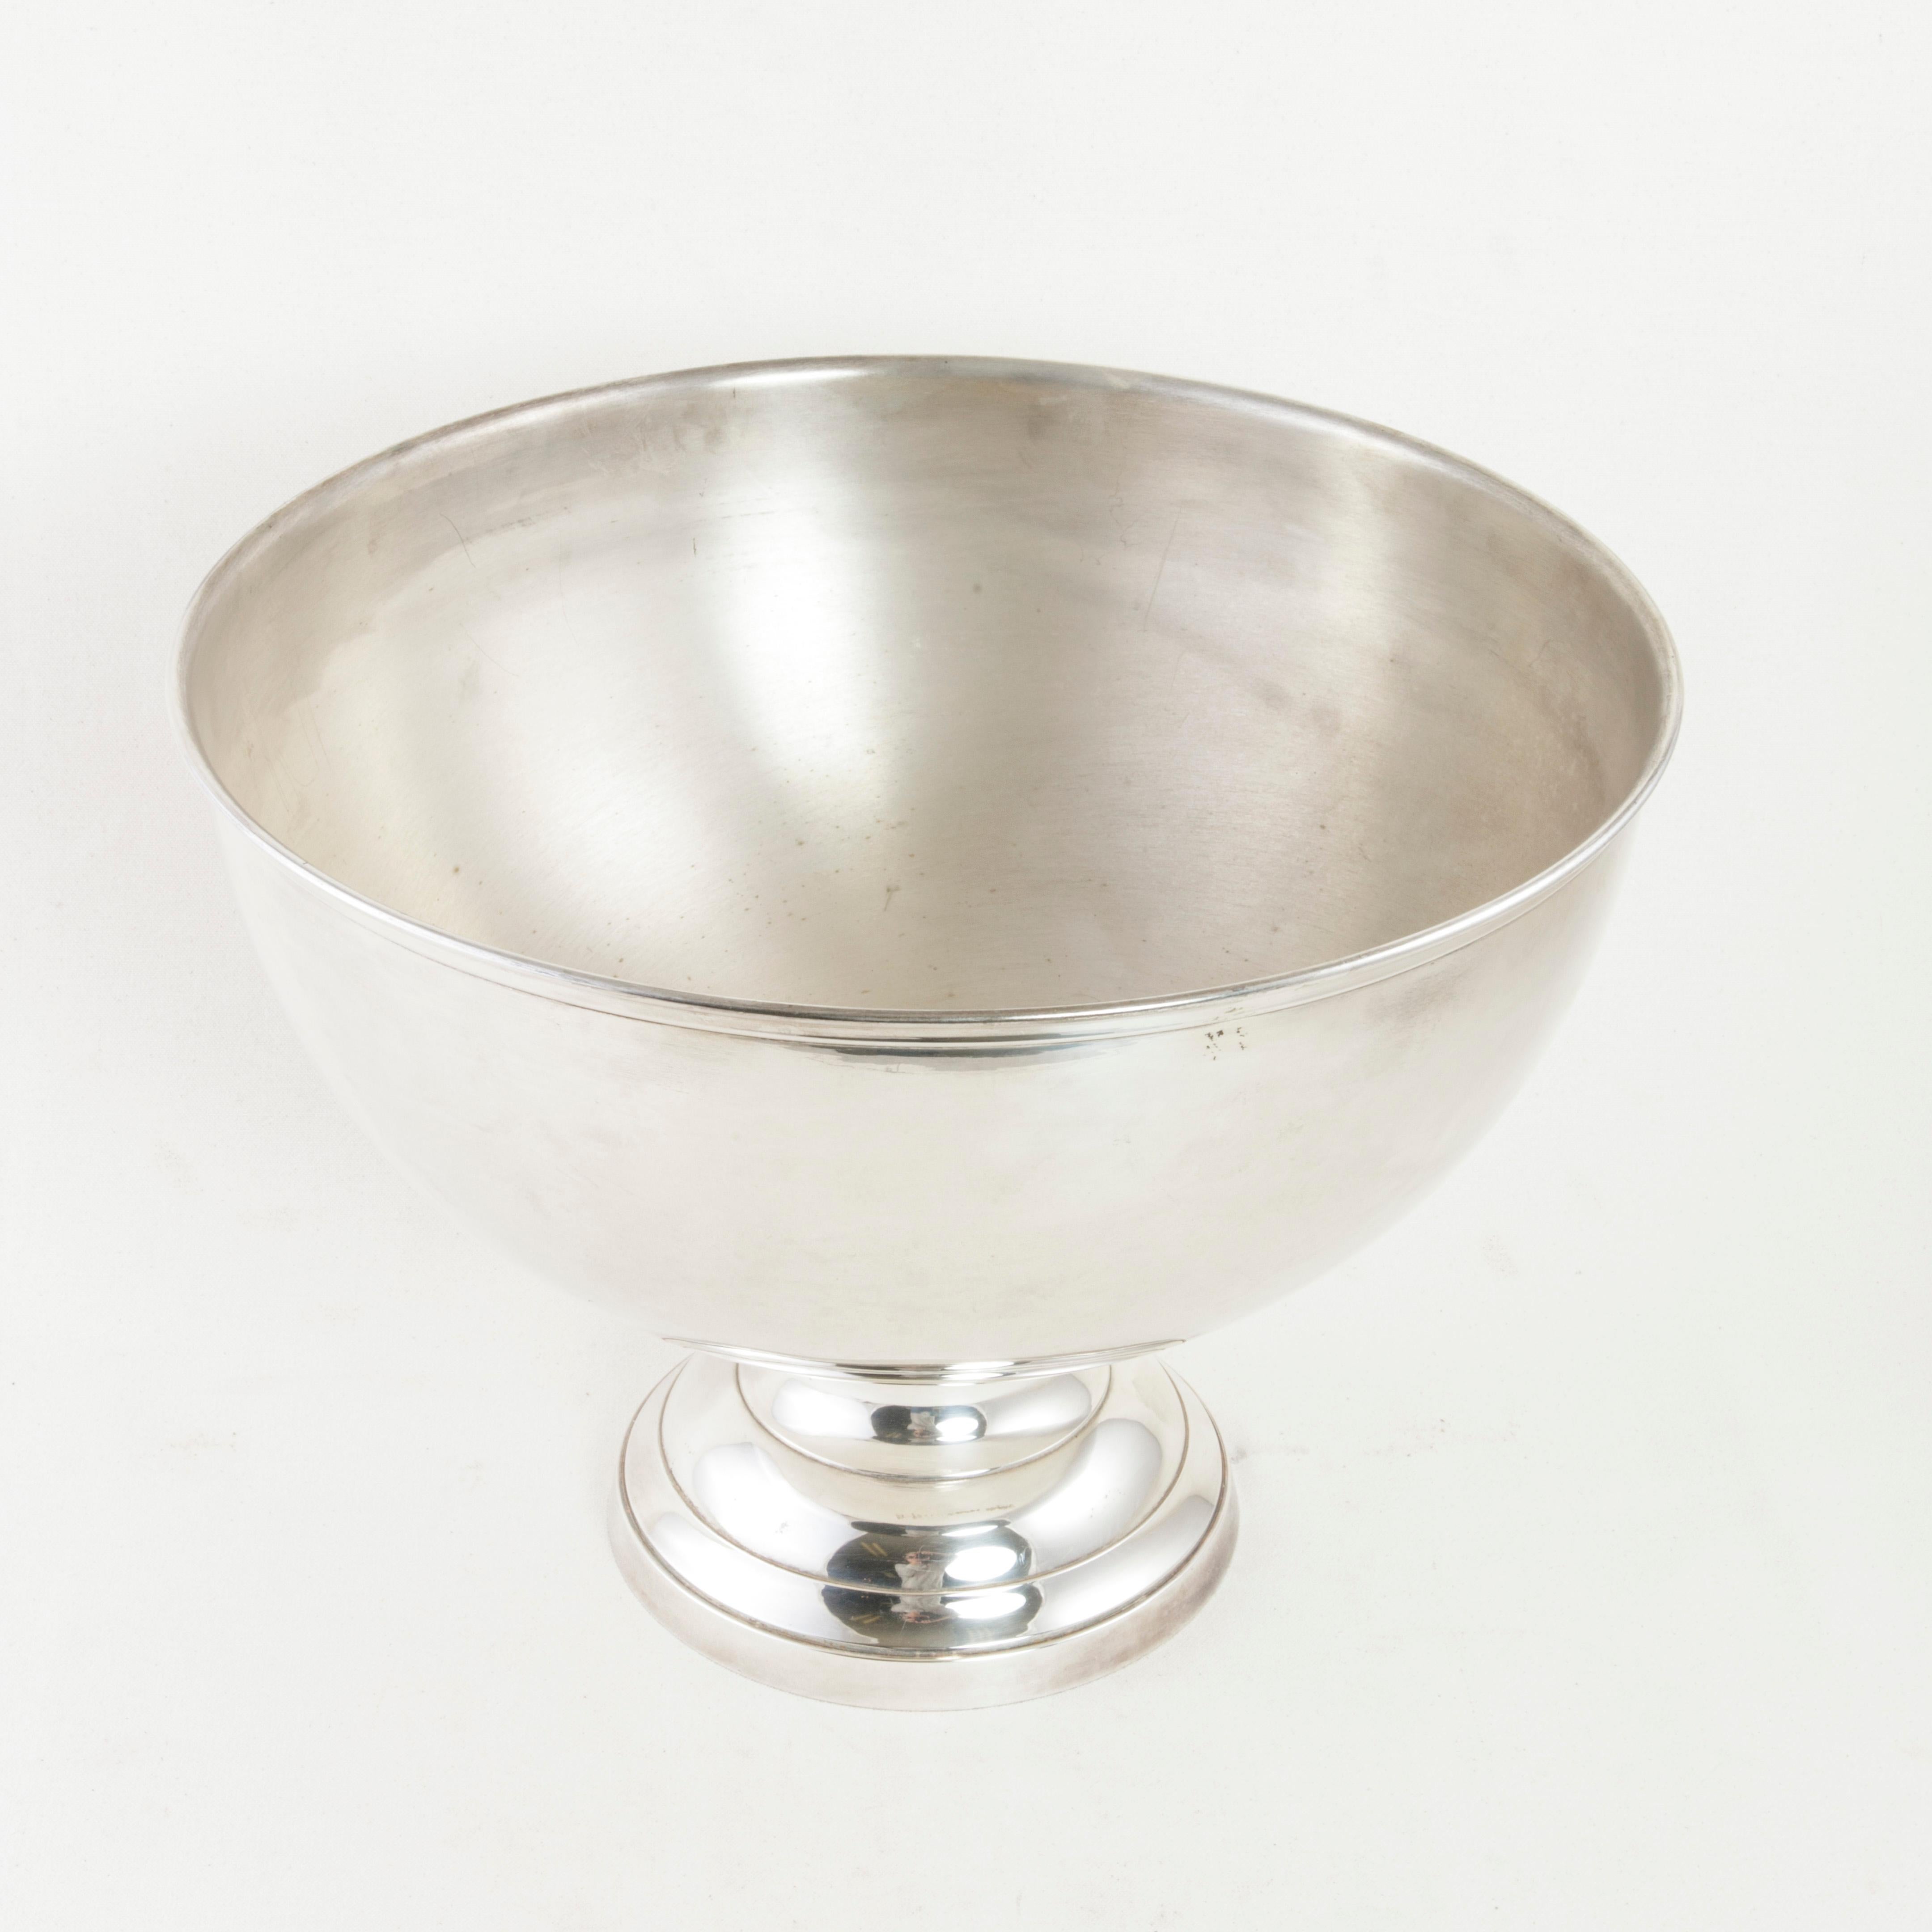 20th Century Midcentury French Silver Plate Footed Hotel Champagne Bucket with Insert